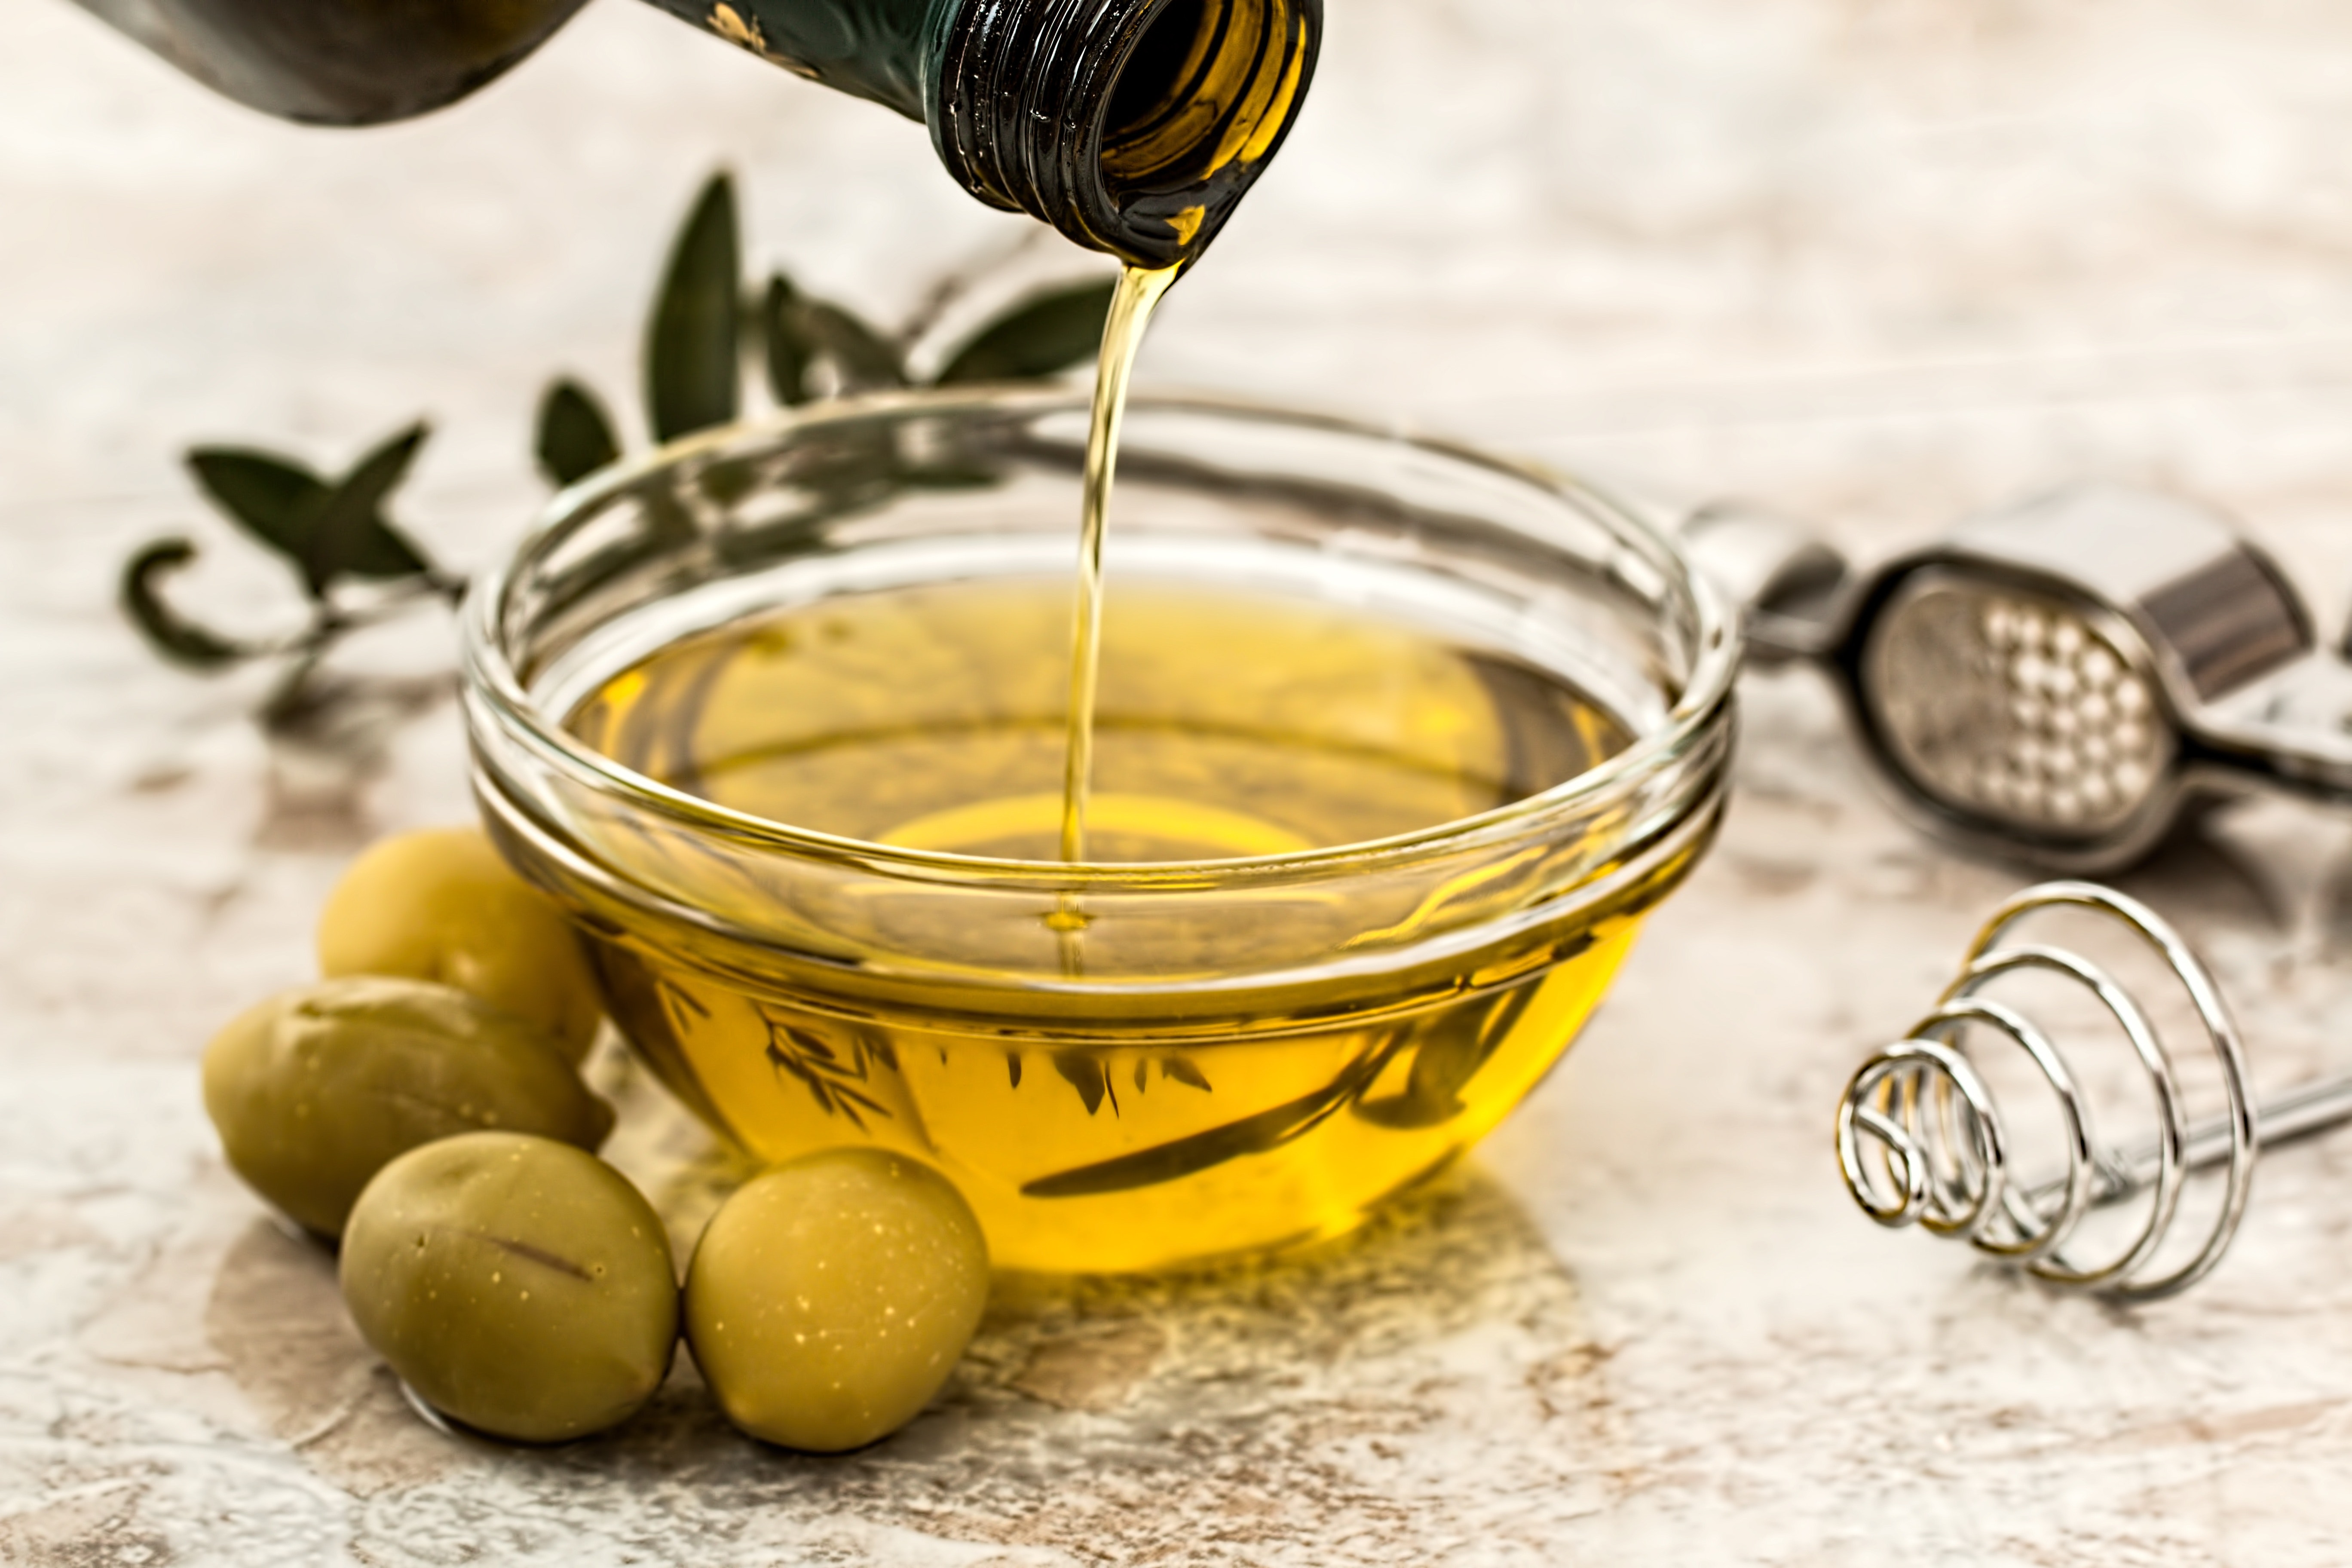 Is Olive Oil a Good Cooking Oil? A Critical Look